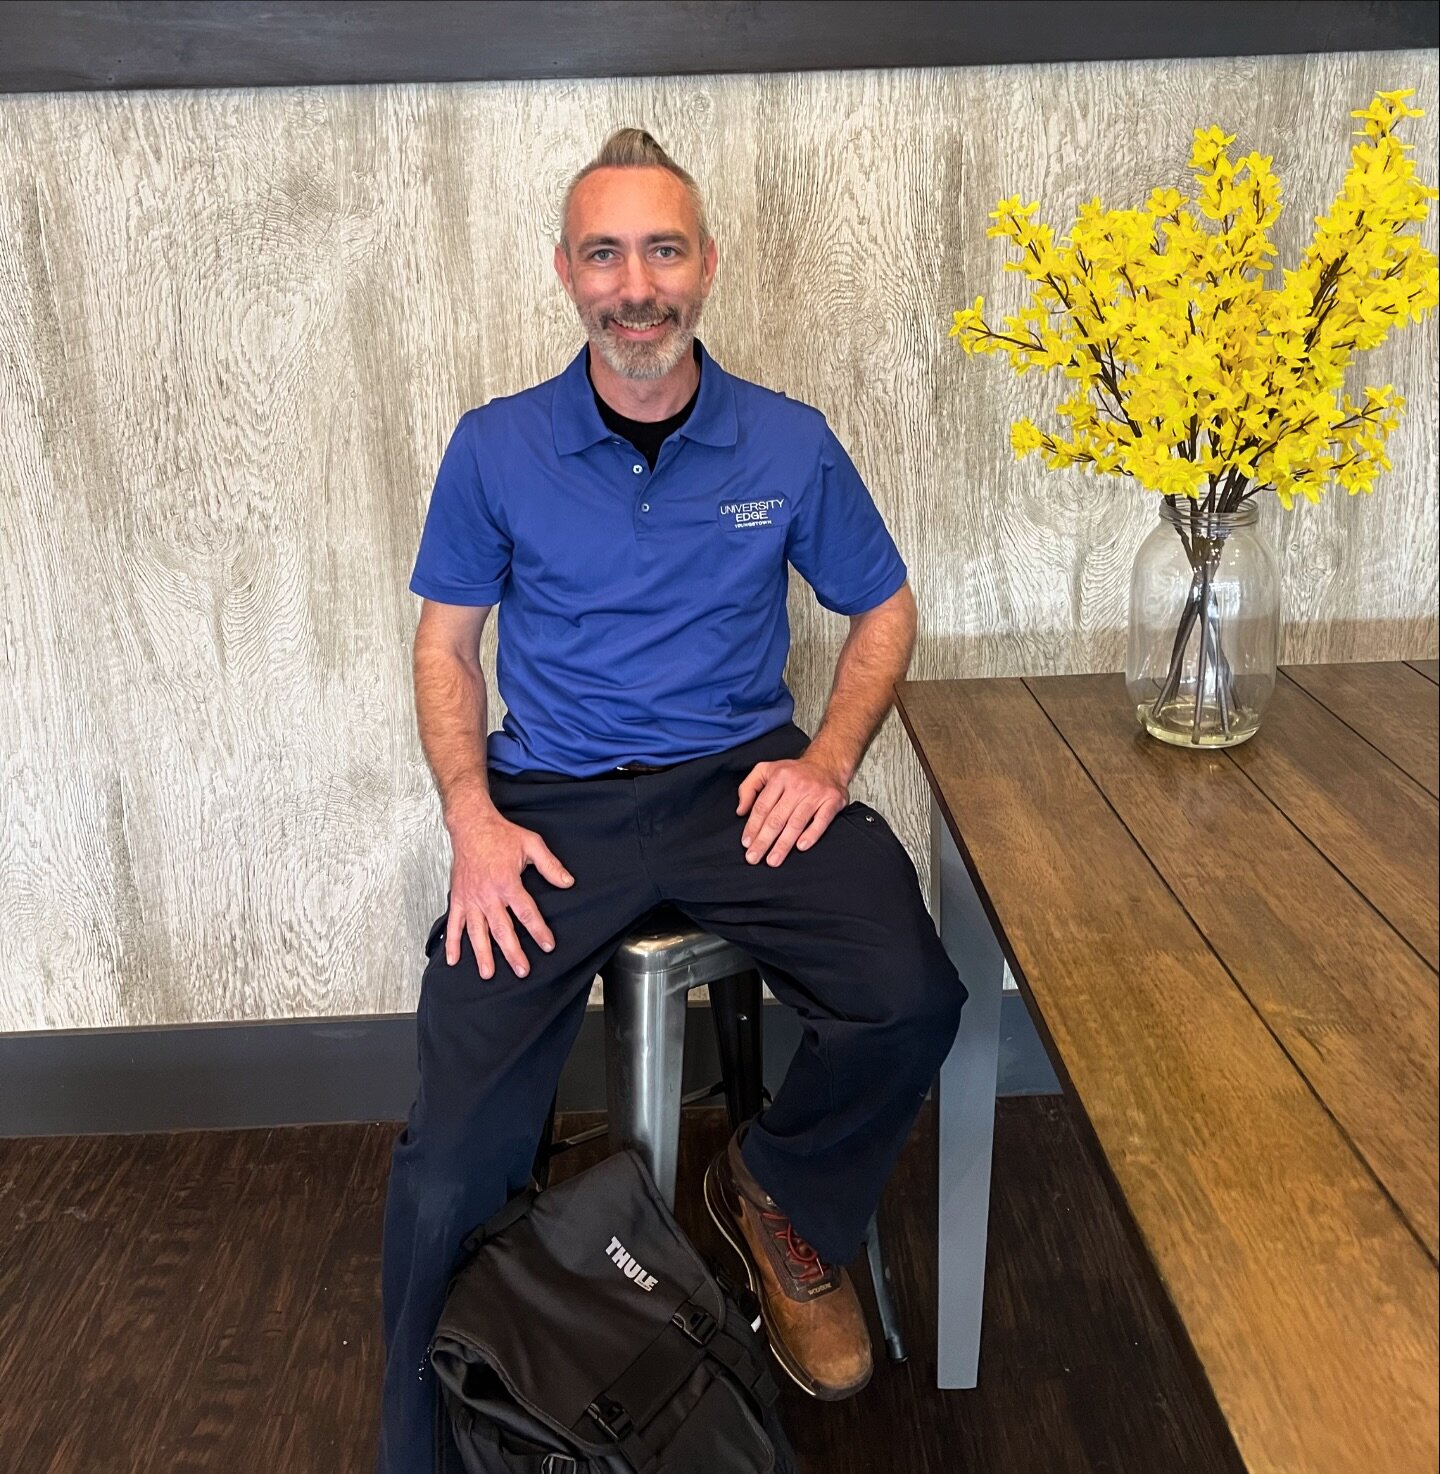 ✨Welcoming our new Maintenance Supervisor Jason✨
 Jason is responsible for ensuring that your maintenance requests are completed properly and on time! If you see Jason around the property don&rsquo;t hesitate to say hello😁